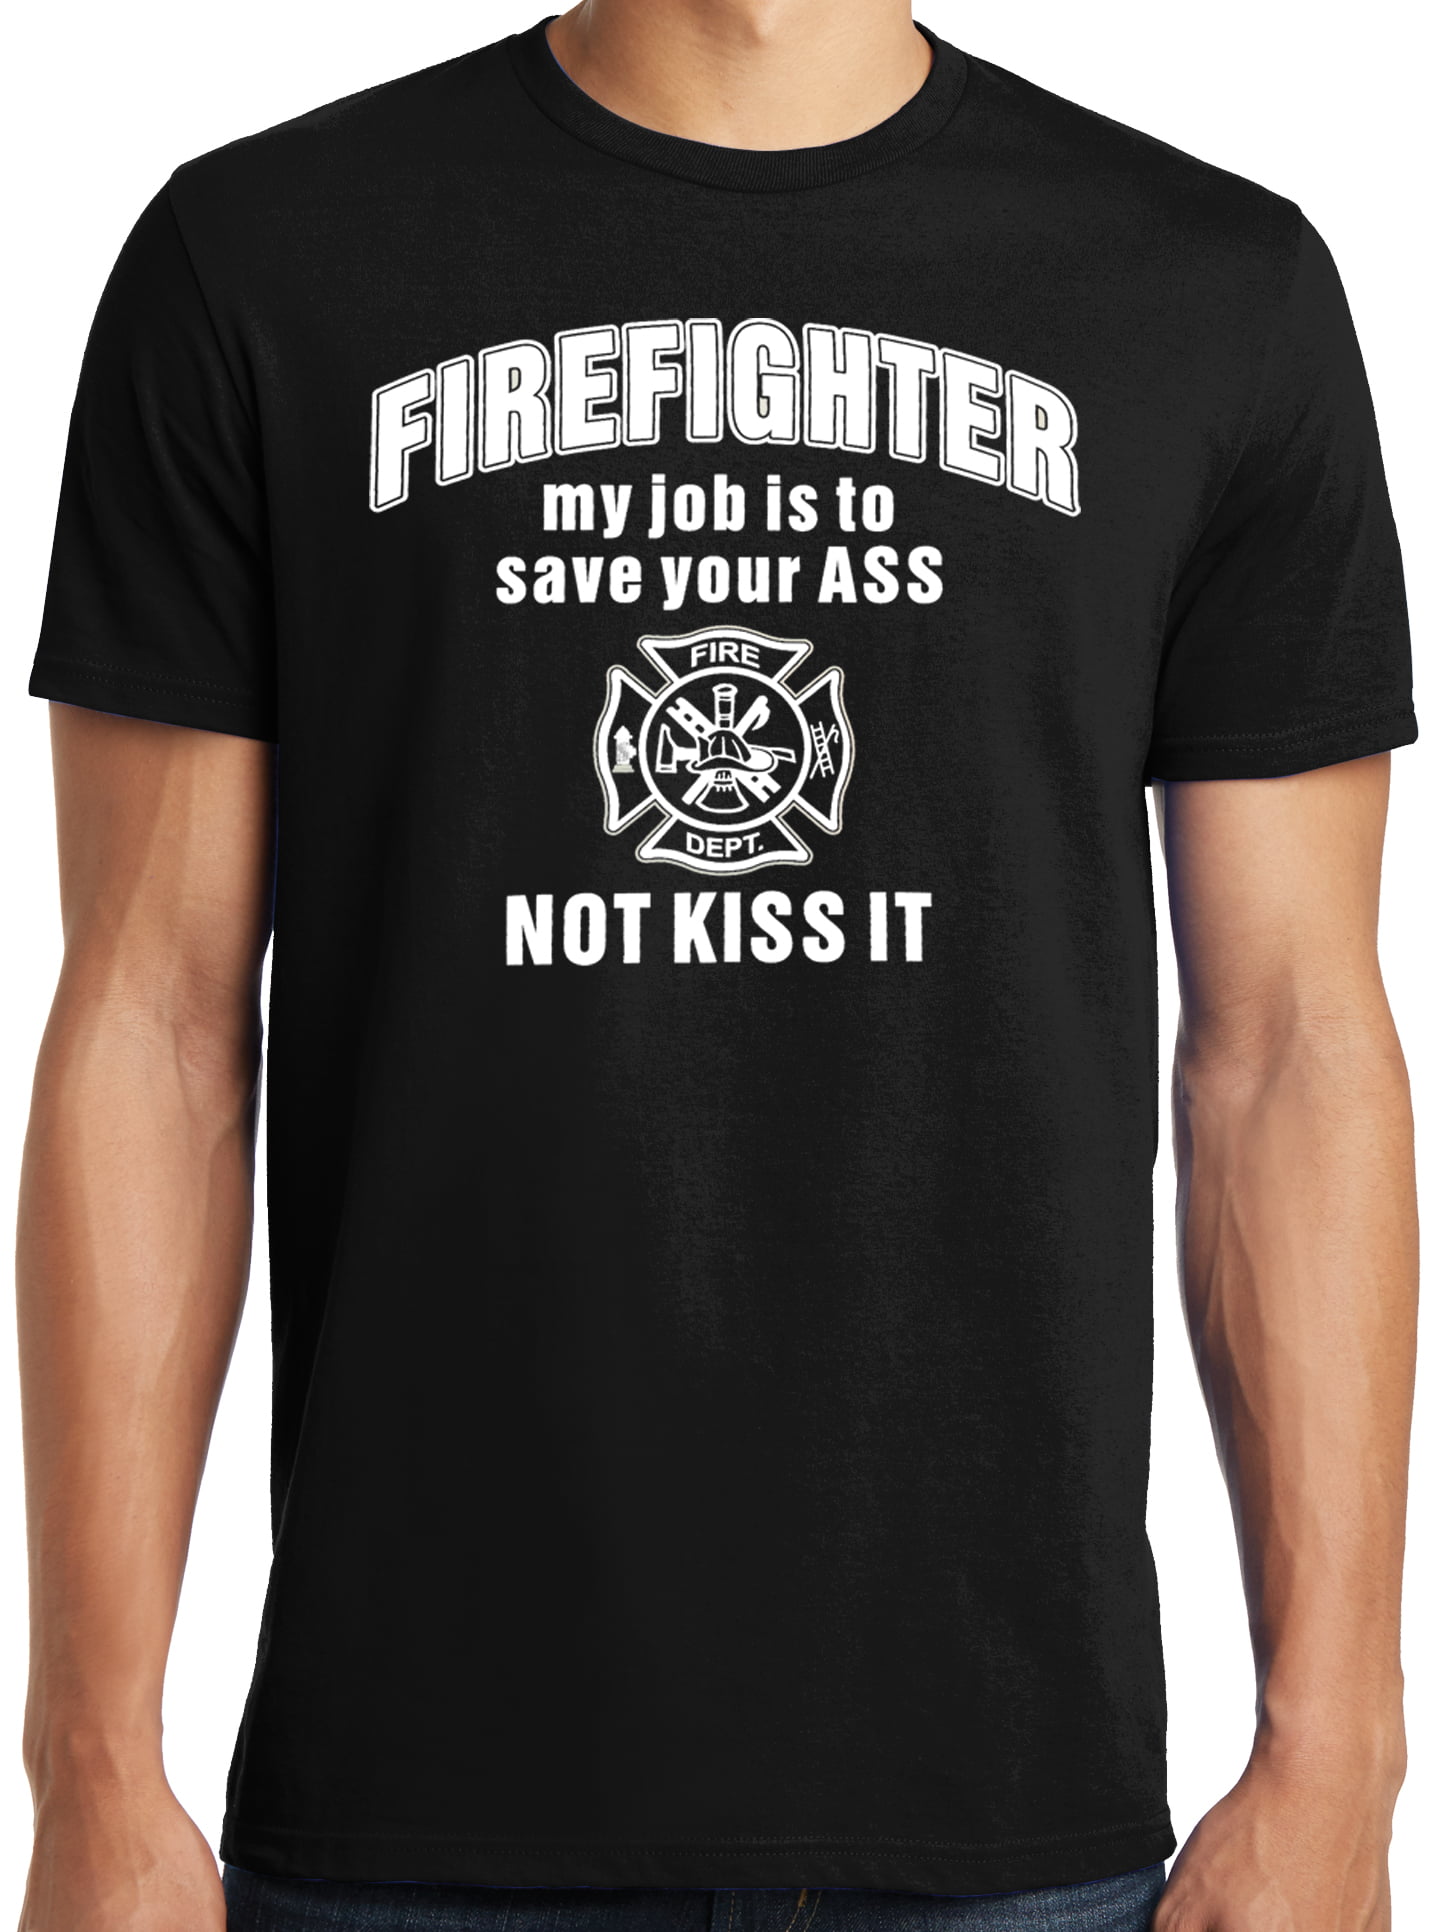 Firefighter My Job Is To Save Your ASS Muscle Shirt Funny 